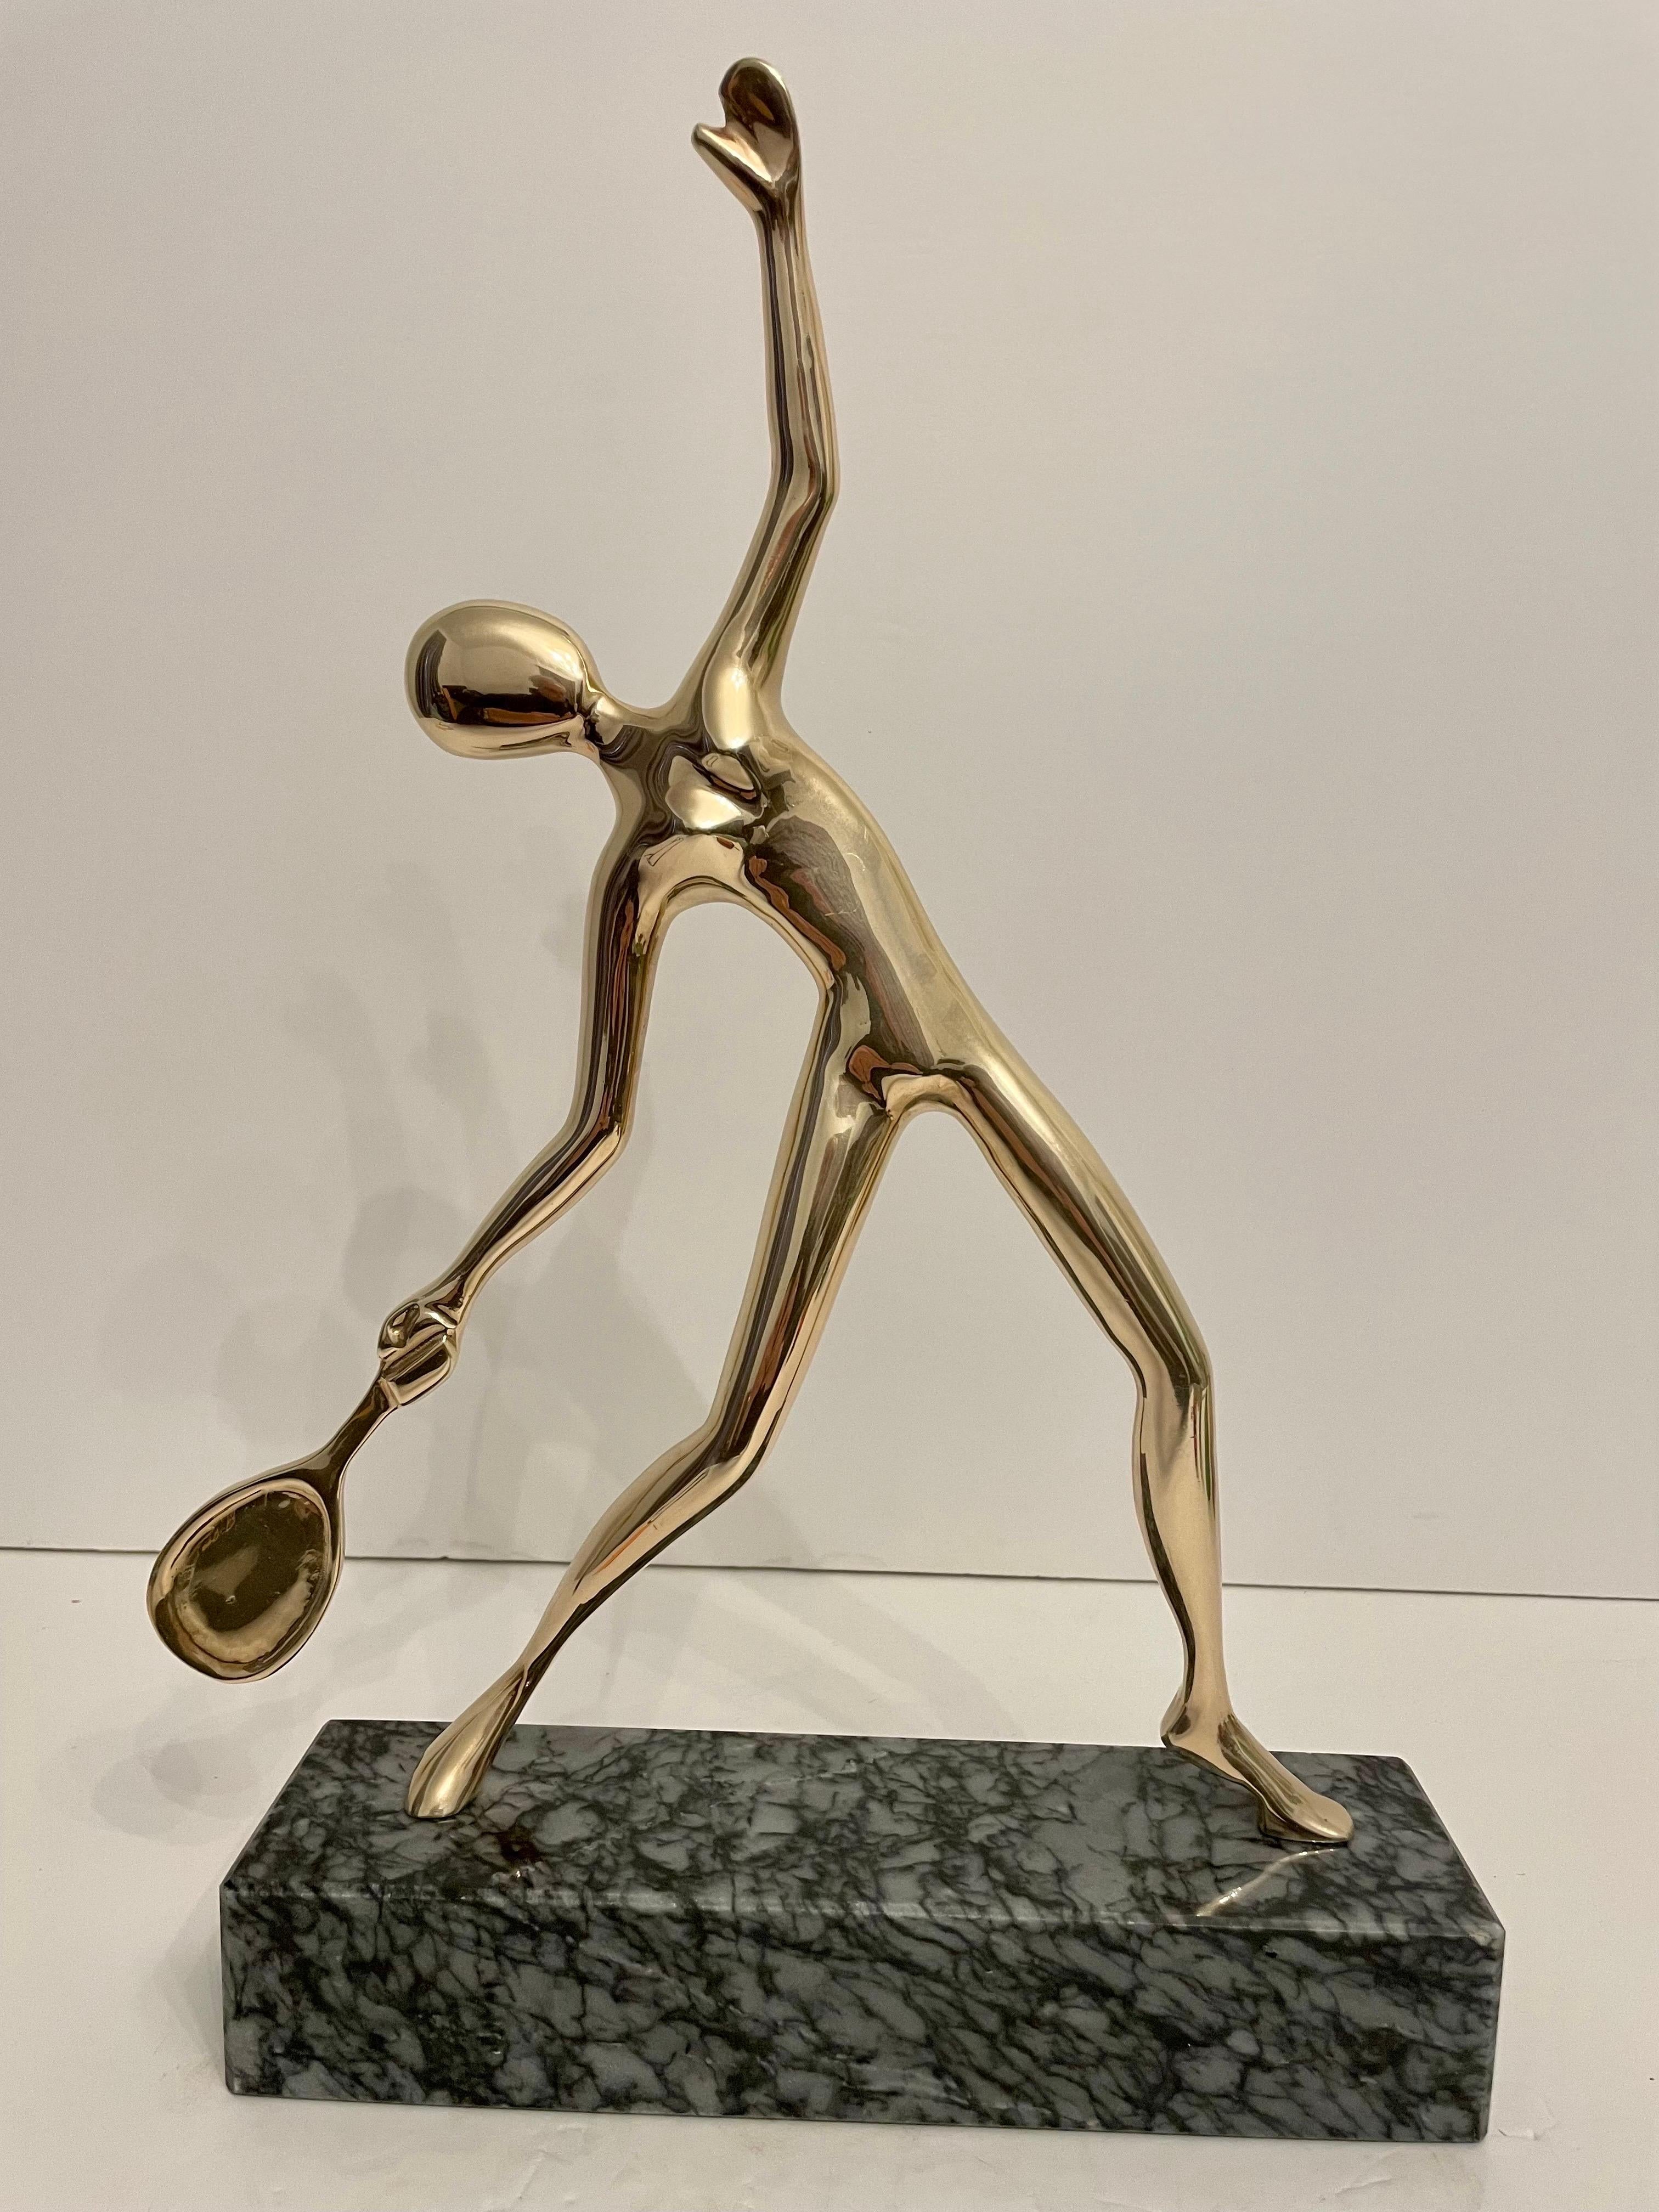 Very unique large heavy solid brass tennis sculpture or statue on grey and black marble base. Great abstract Mid Century form in very good condition. Measures 17.5